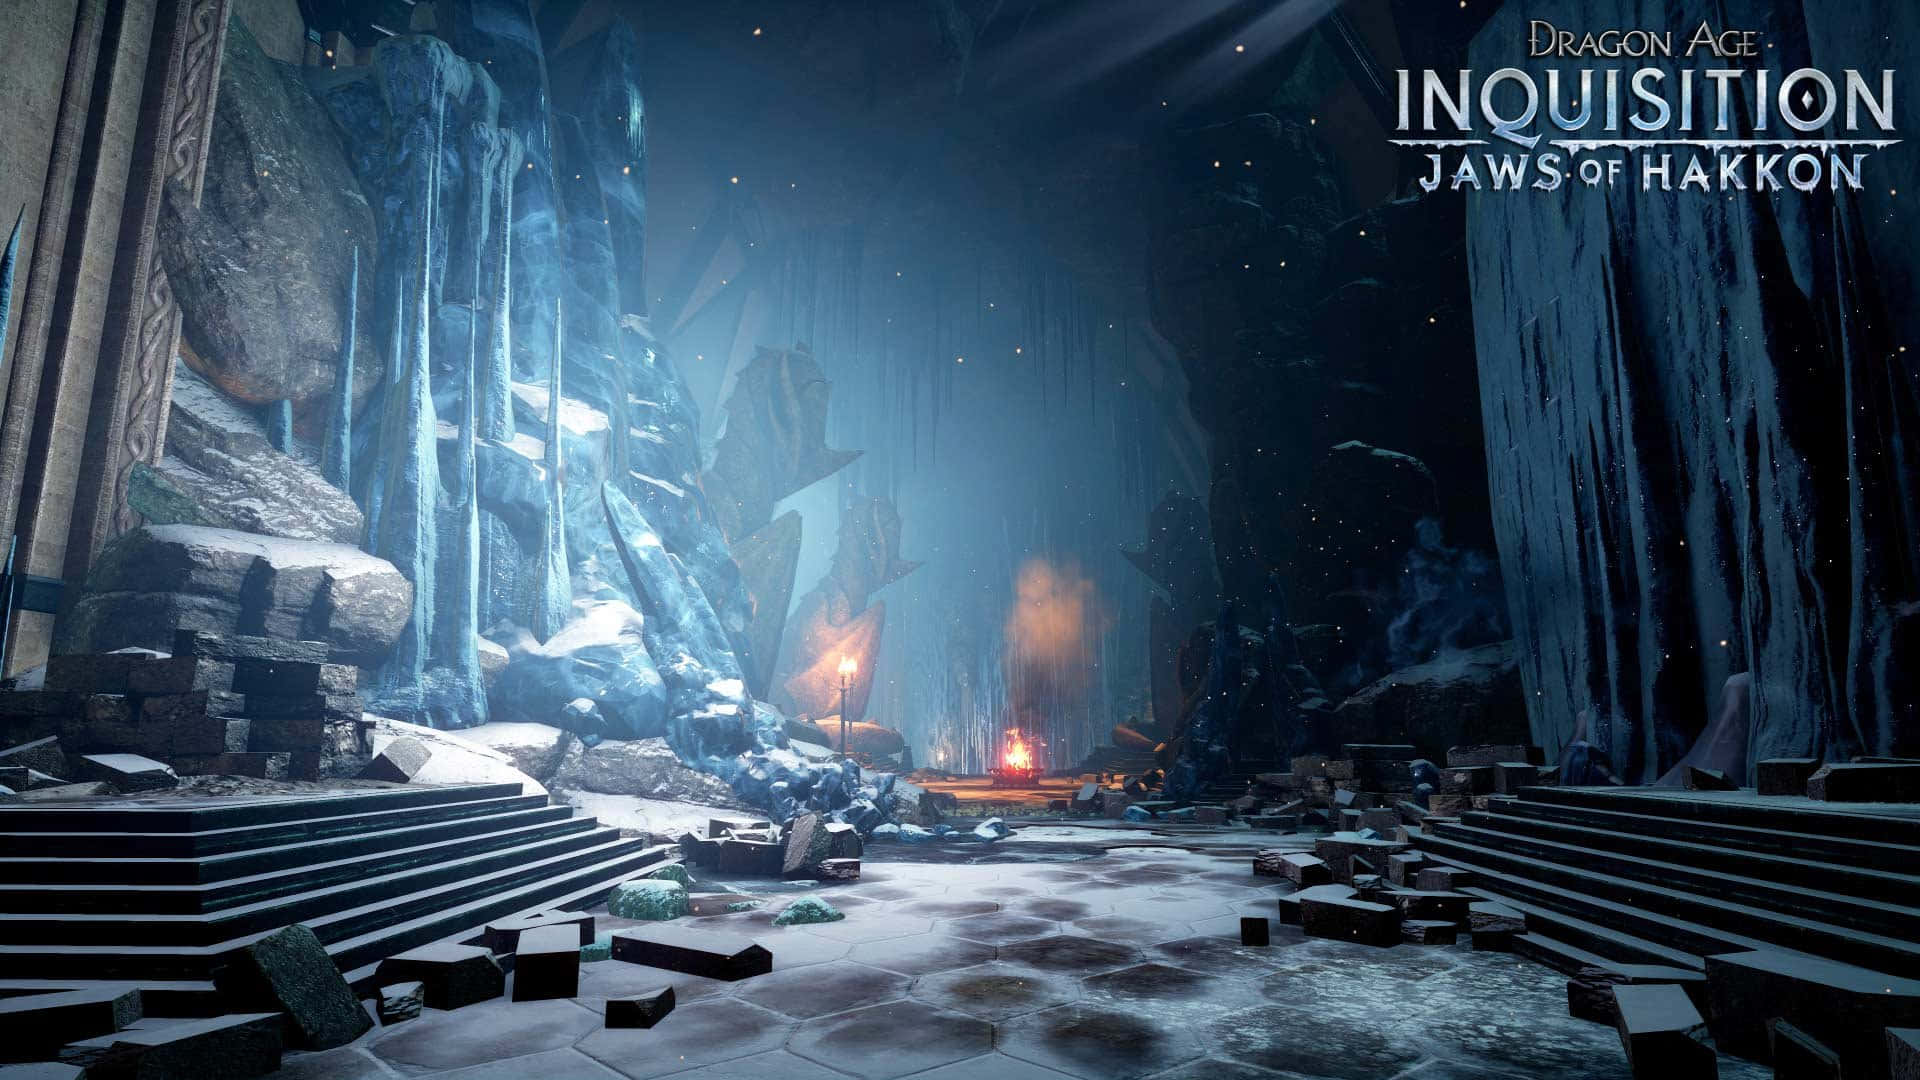 Experience the Epic World of Dragon Age Inquisition